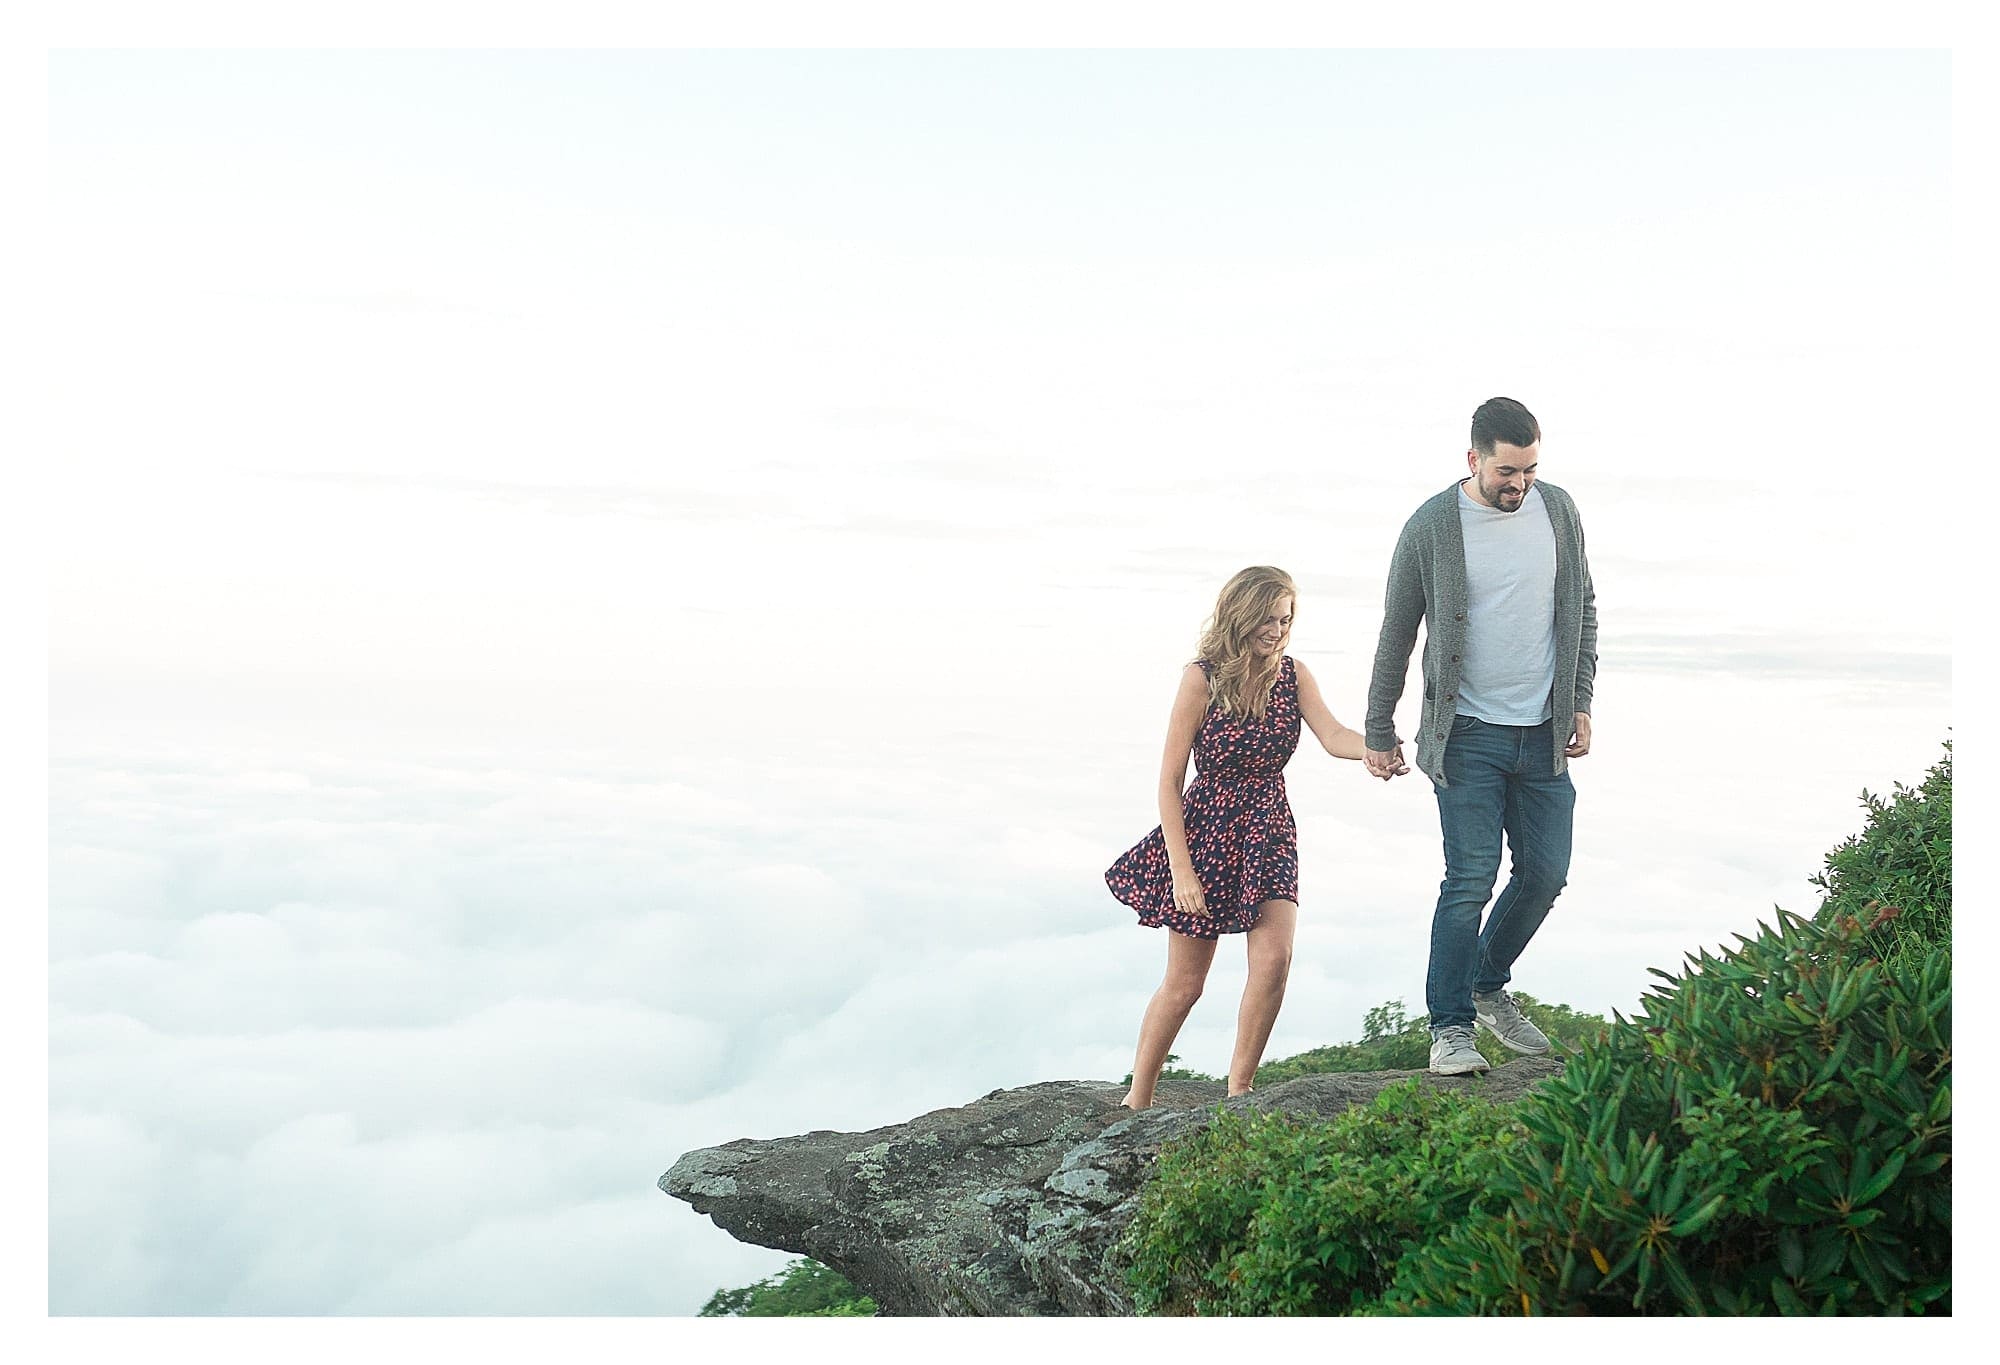 Engaged couple holding hands while walking on mountains edge